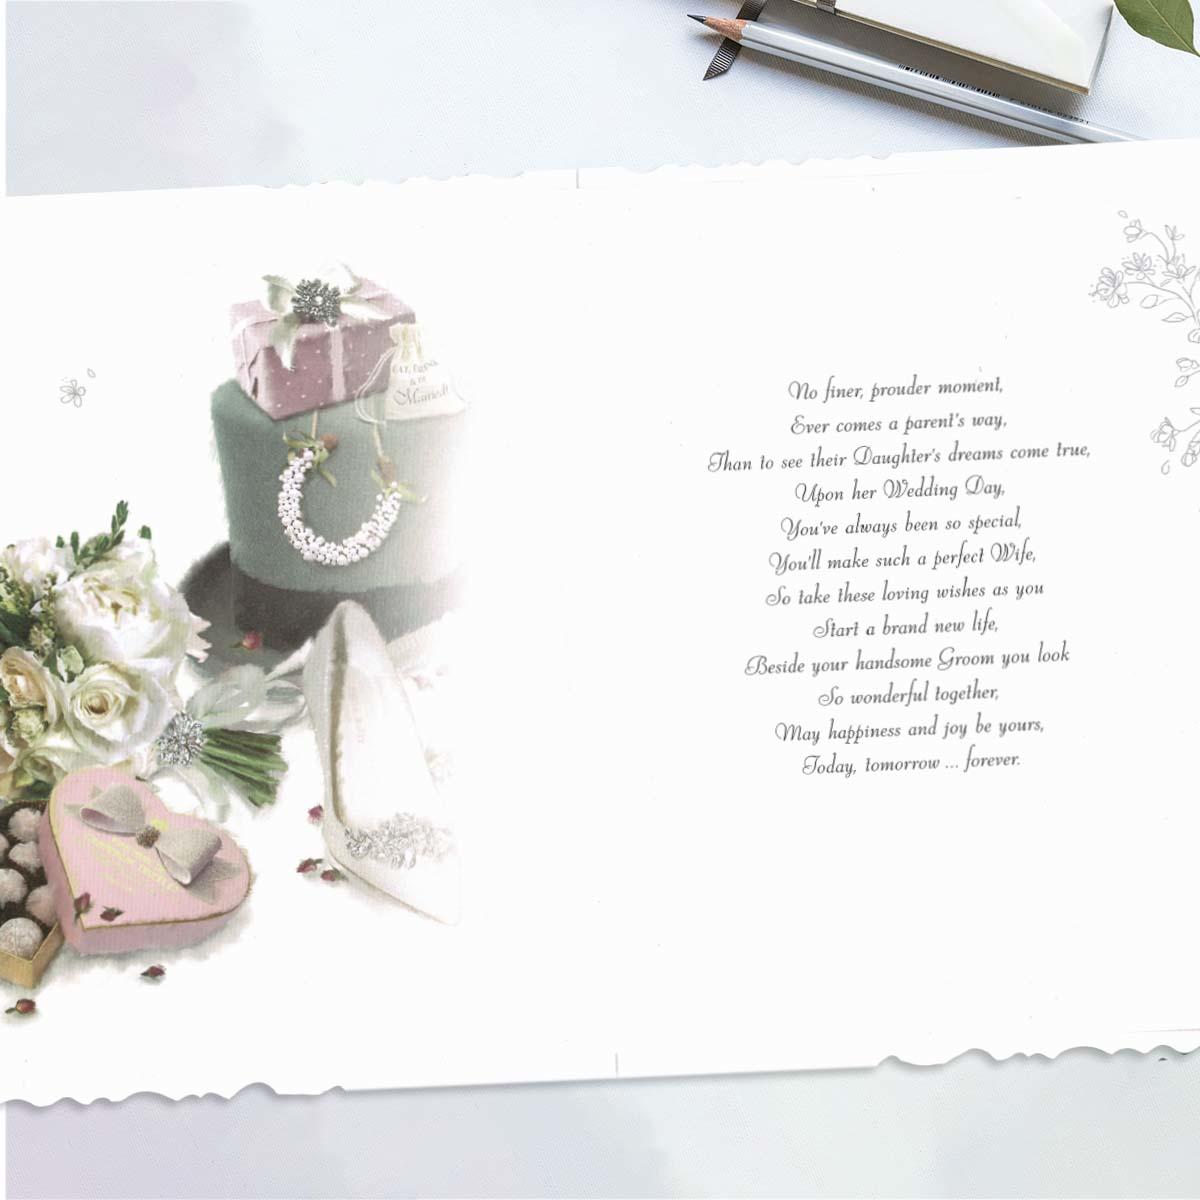 Inside with colour insert and heartfelt words